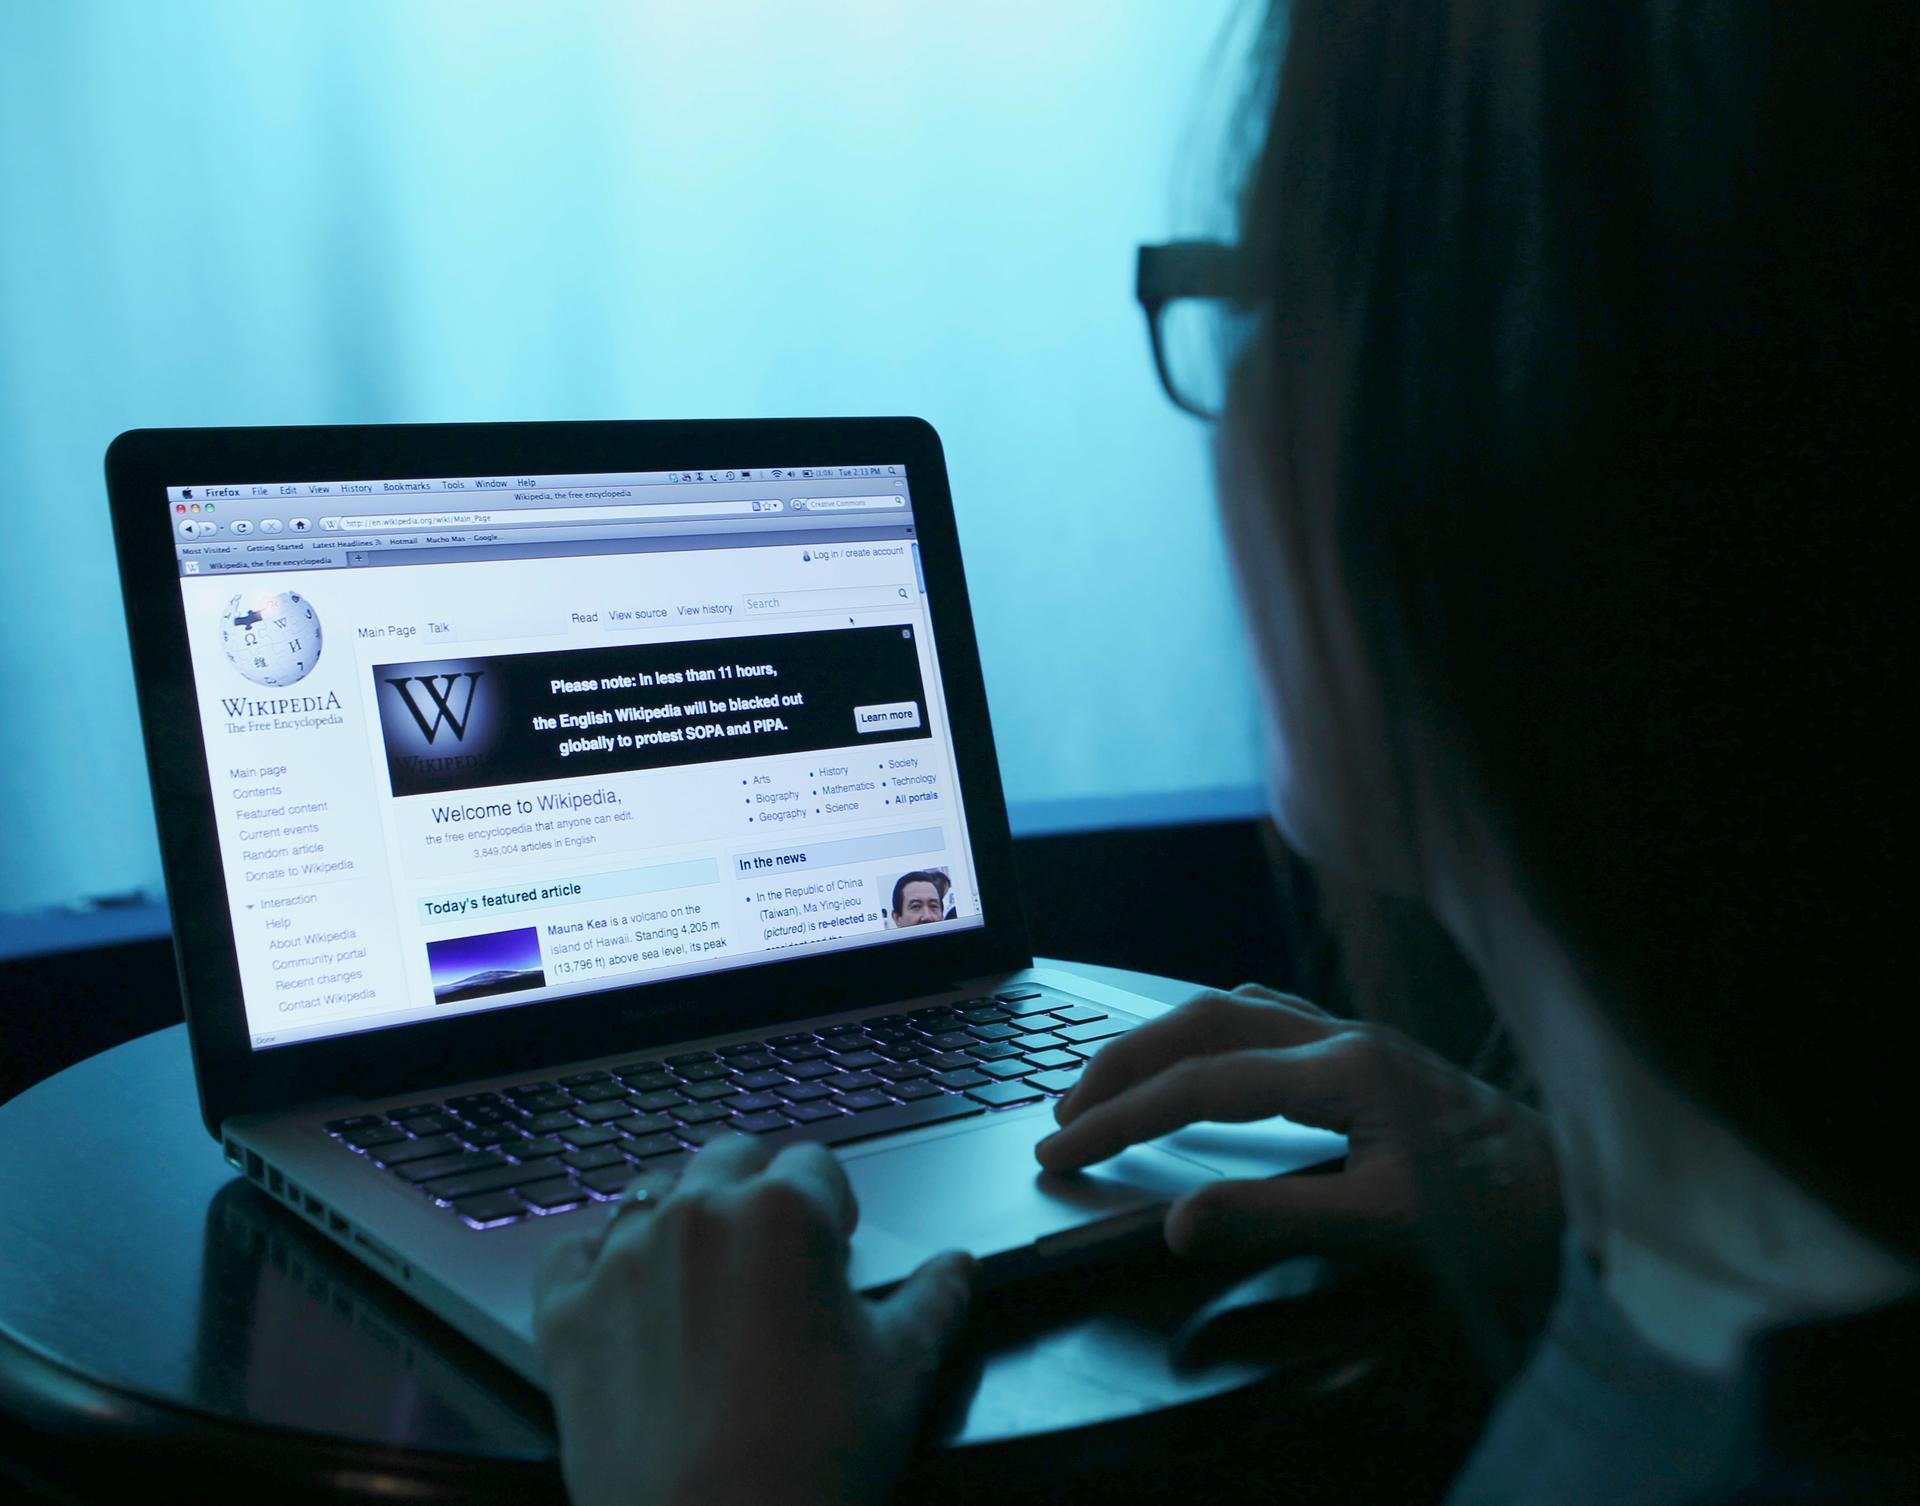 A woman uses Wikipedia on a laptop.